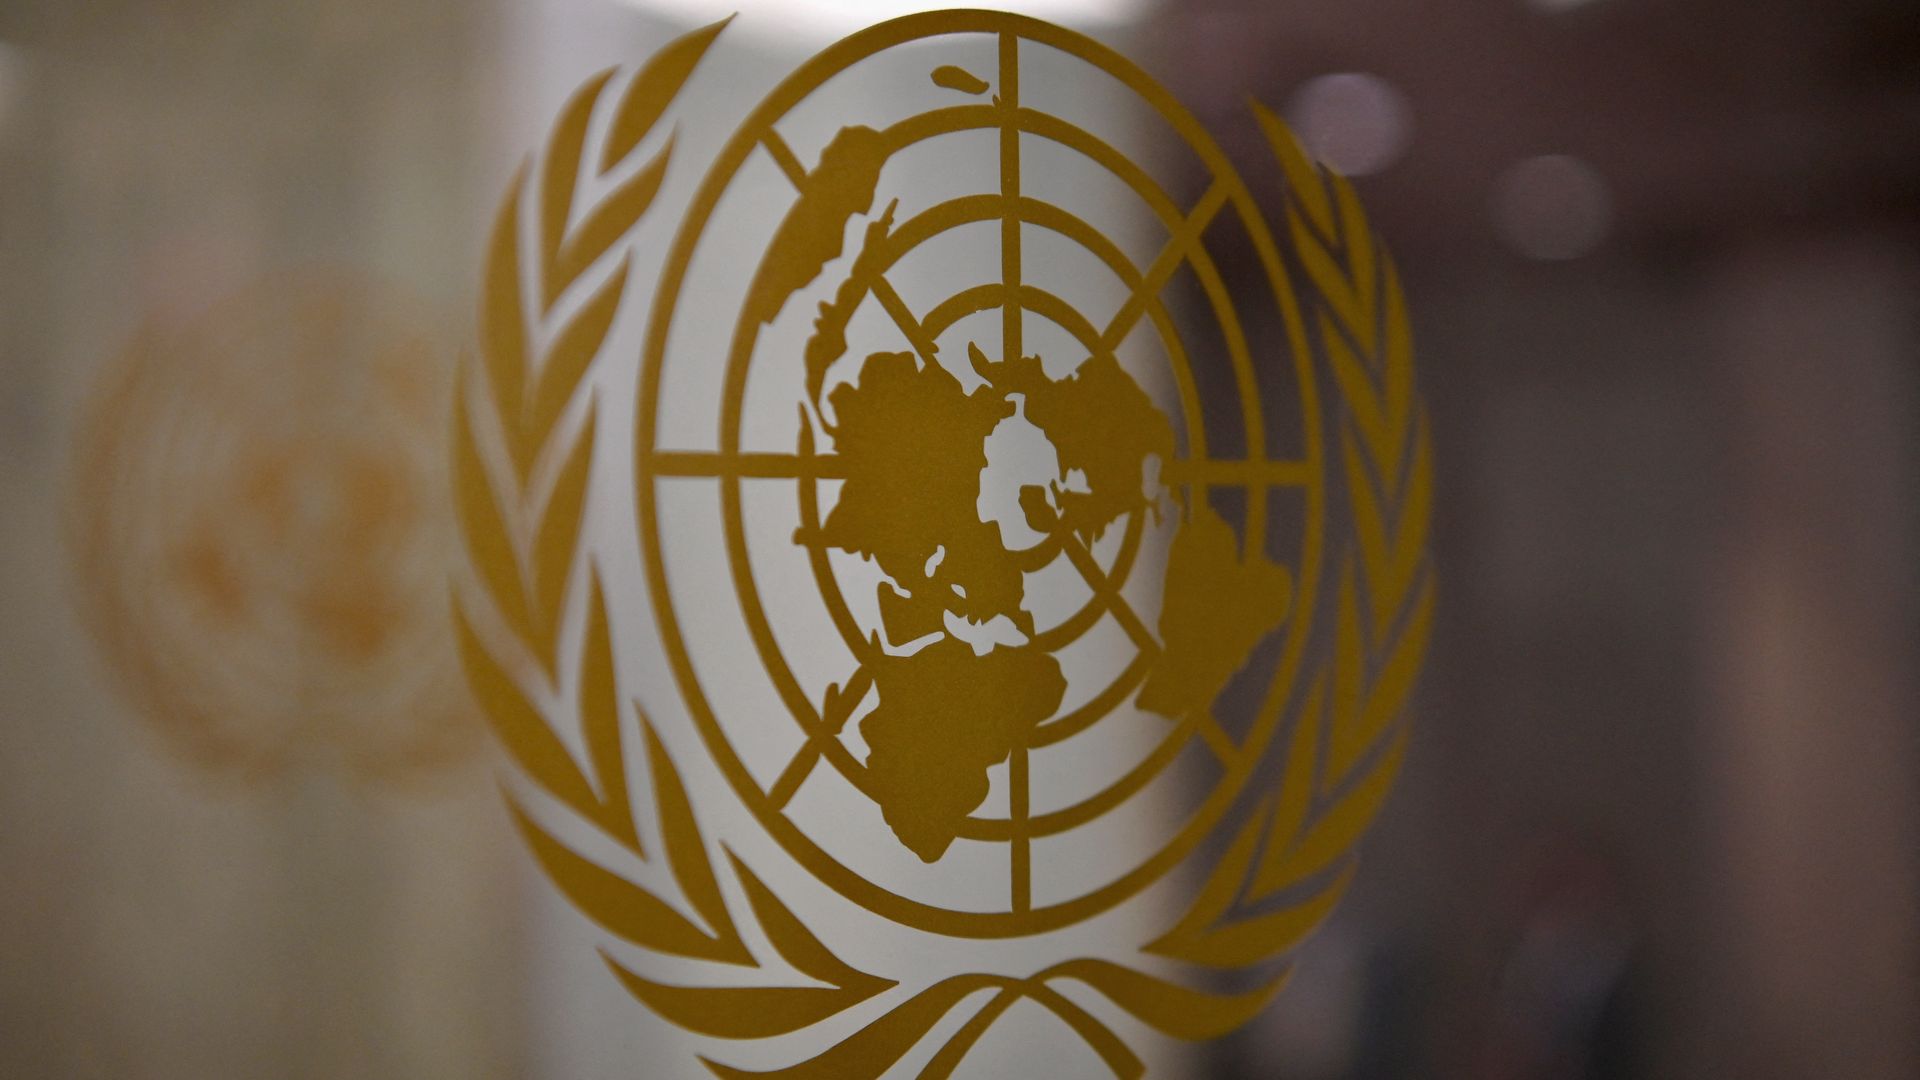 Picture of the United Nations logo